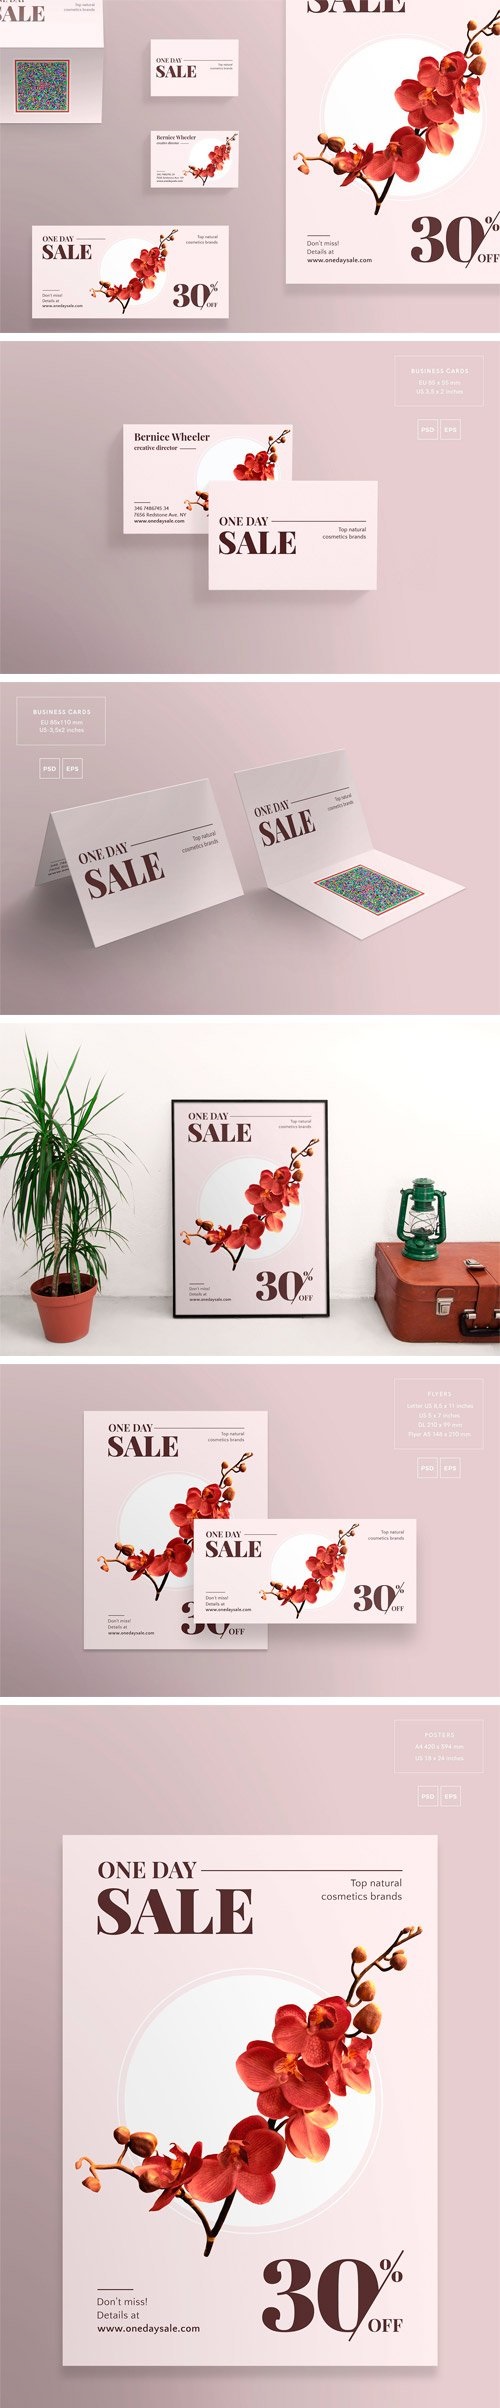 Print Pack | One Day Sale - 1556160